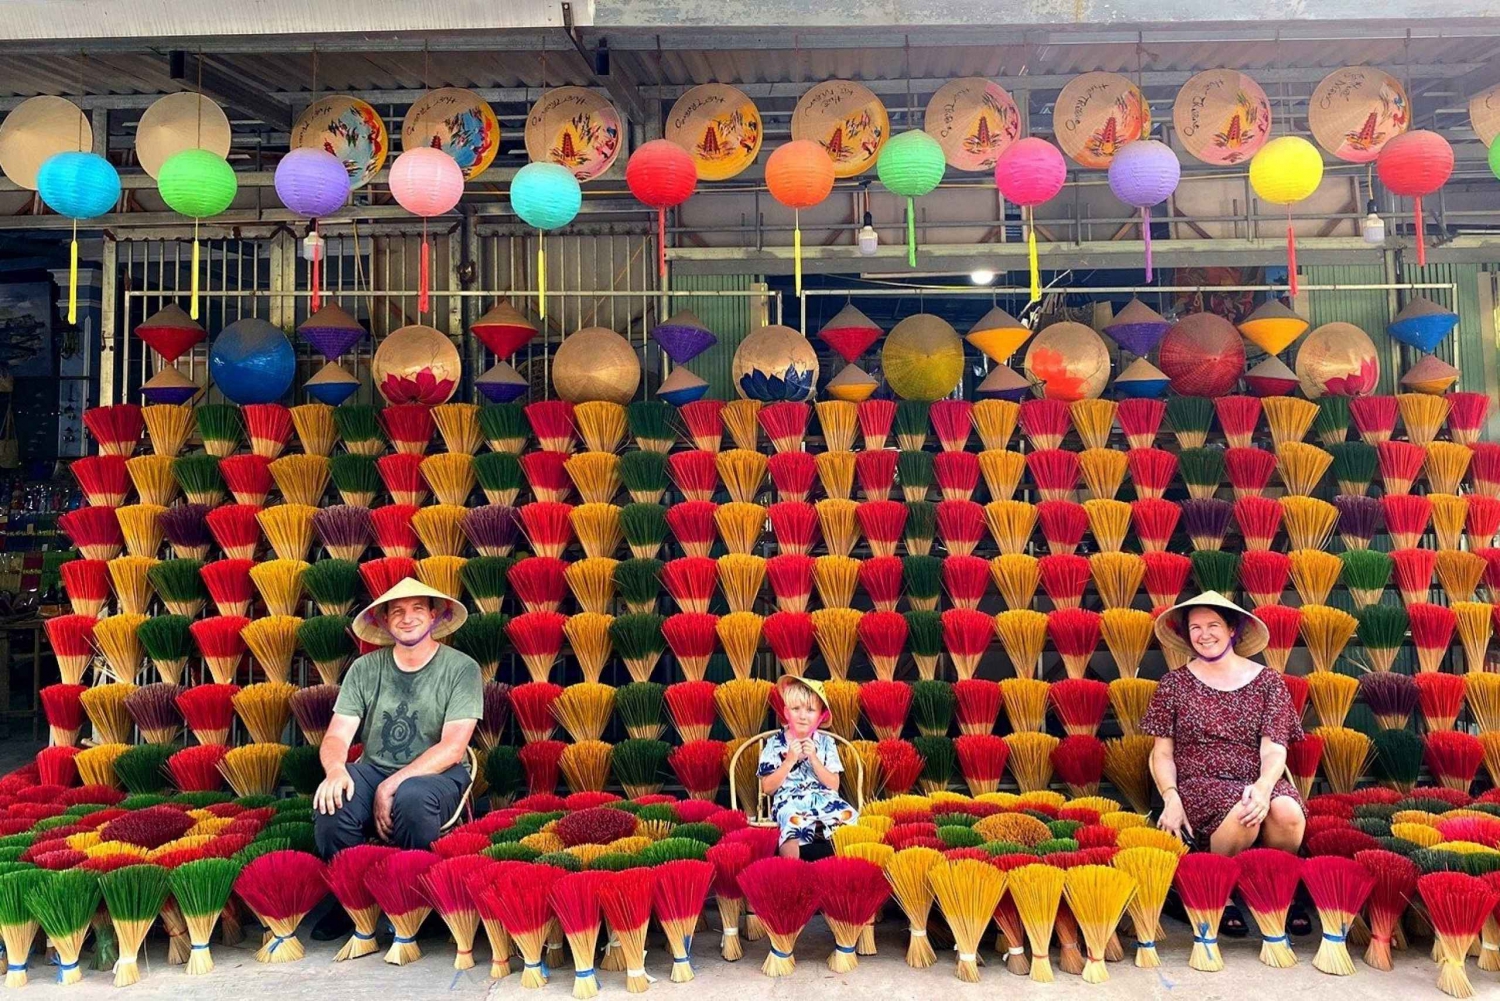 From Hue: Hue Discovery Full Day Deluxe Small Group Tour